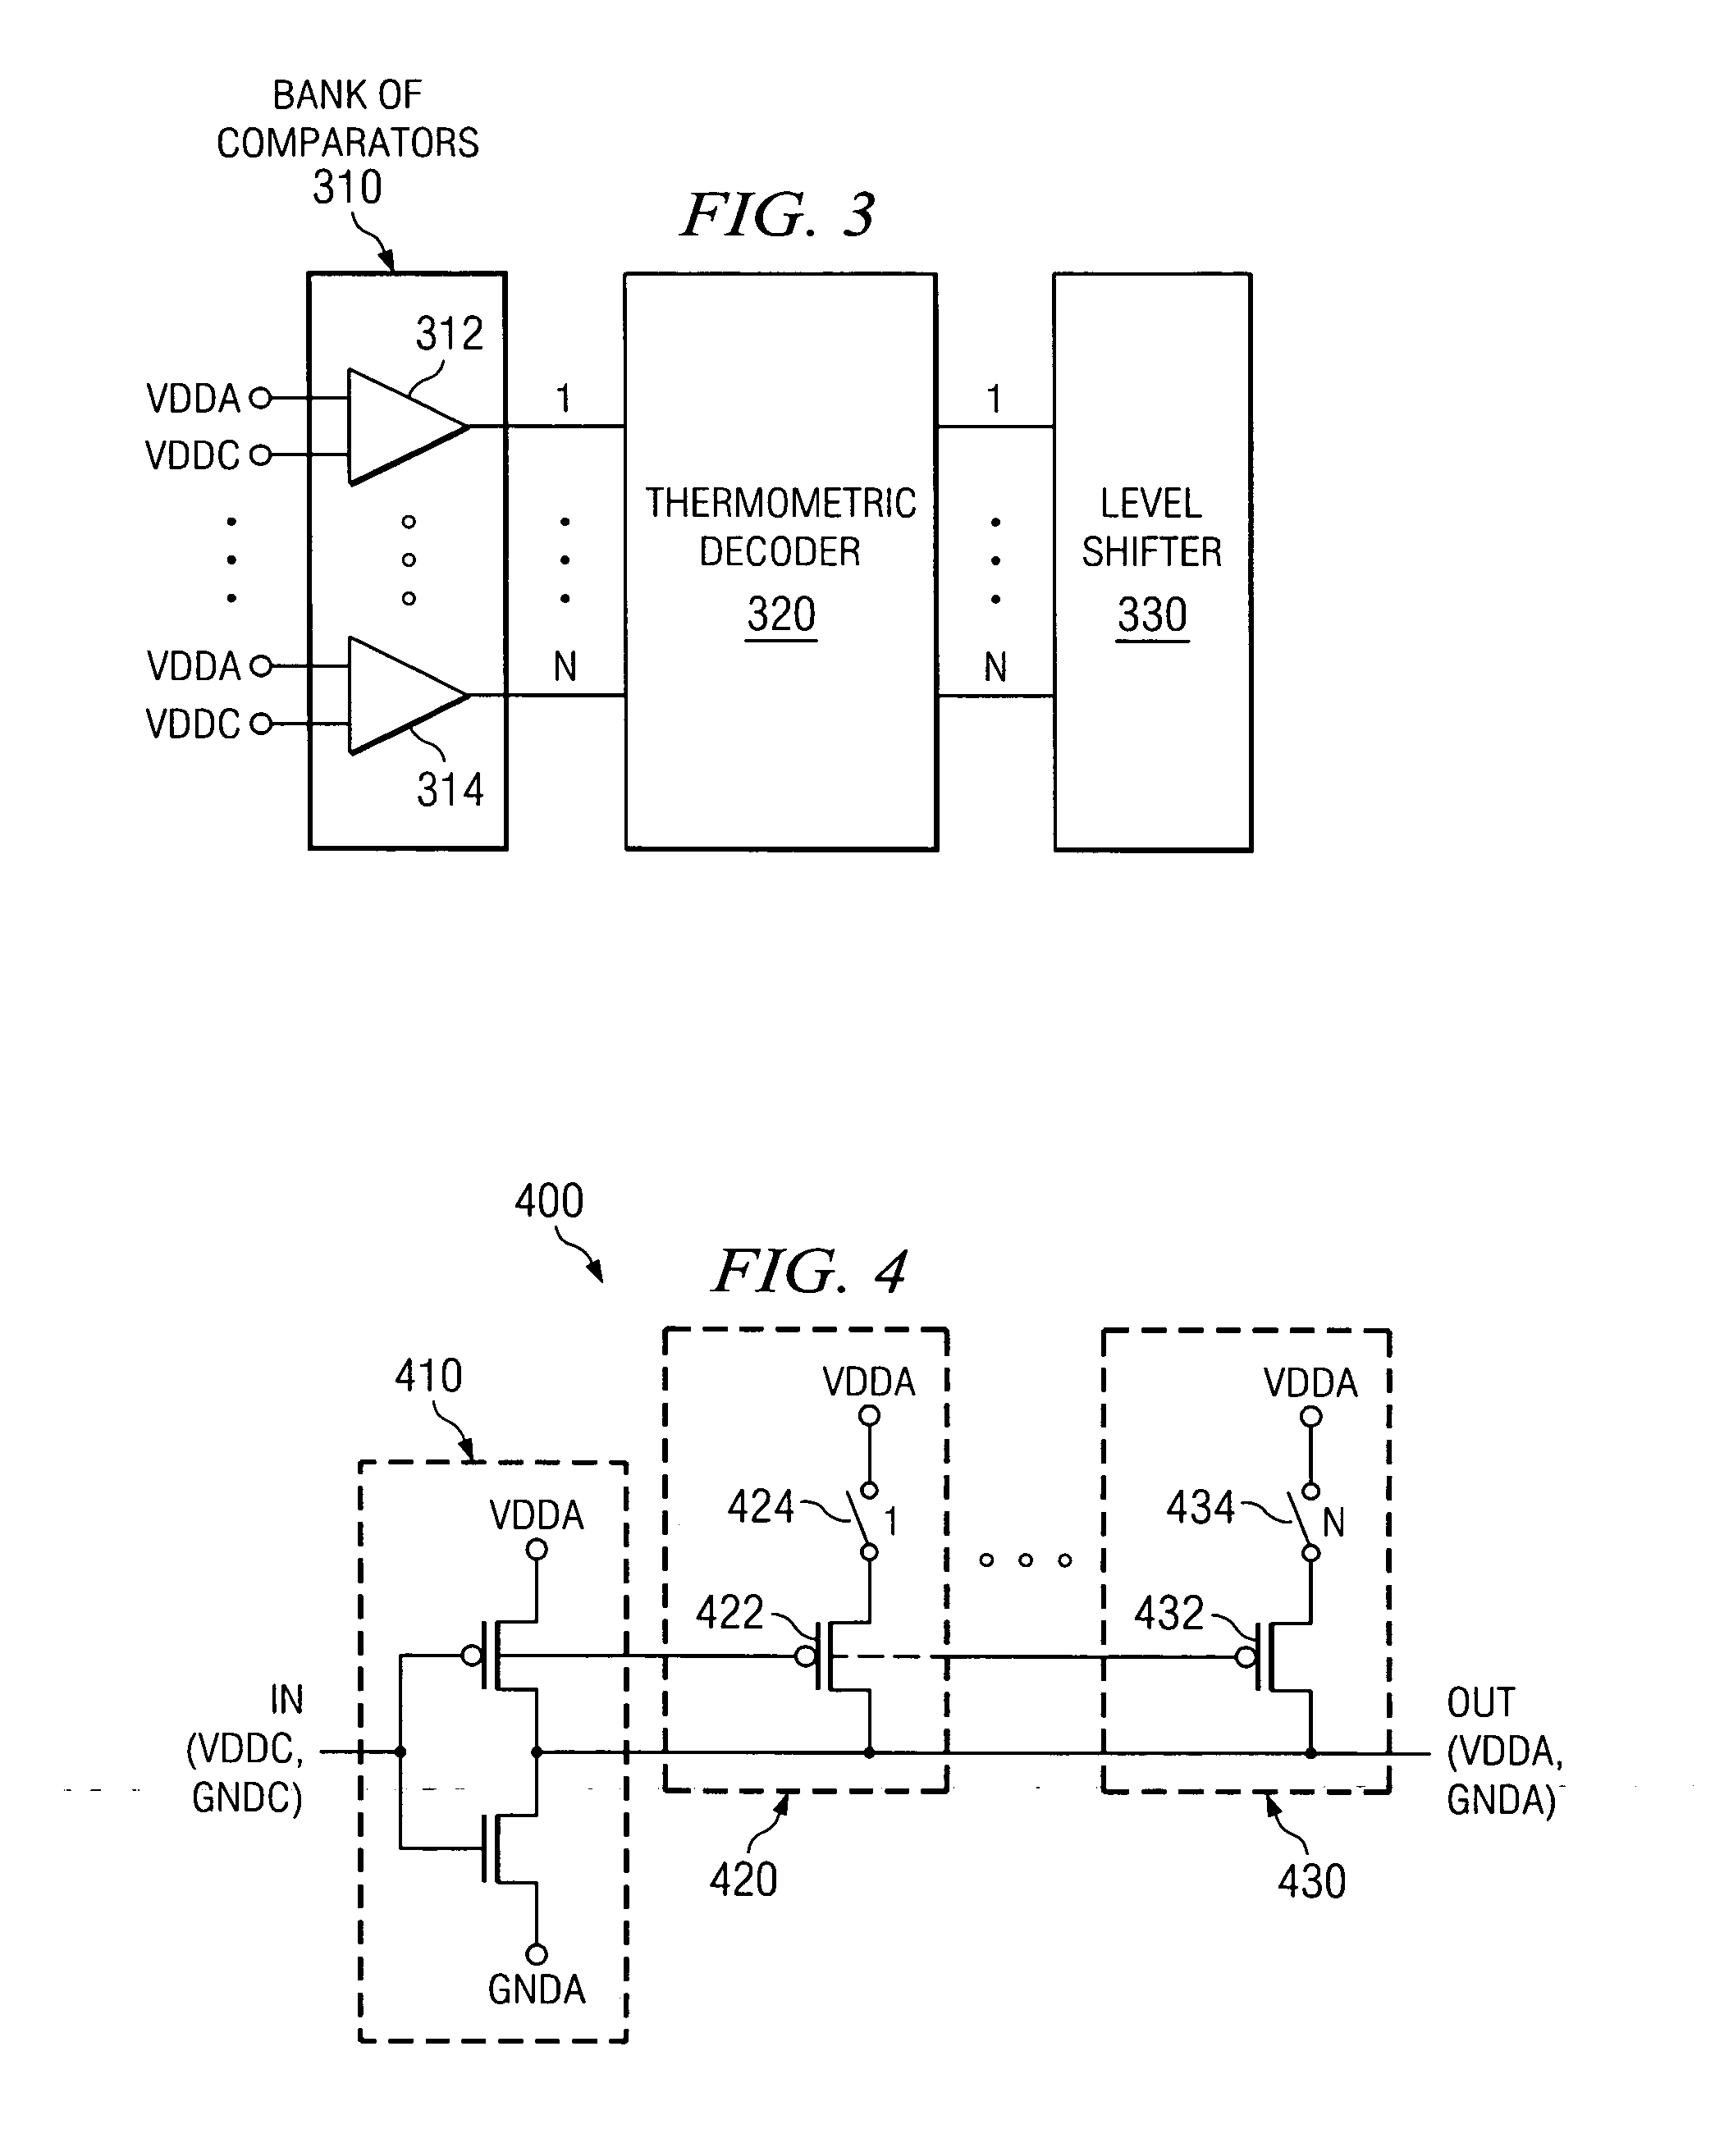 Level shifter apparatus and method for minimizing duty cycle distortion